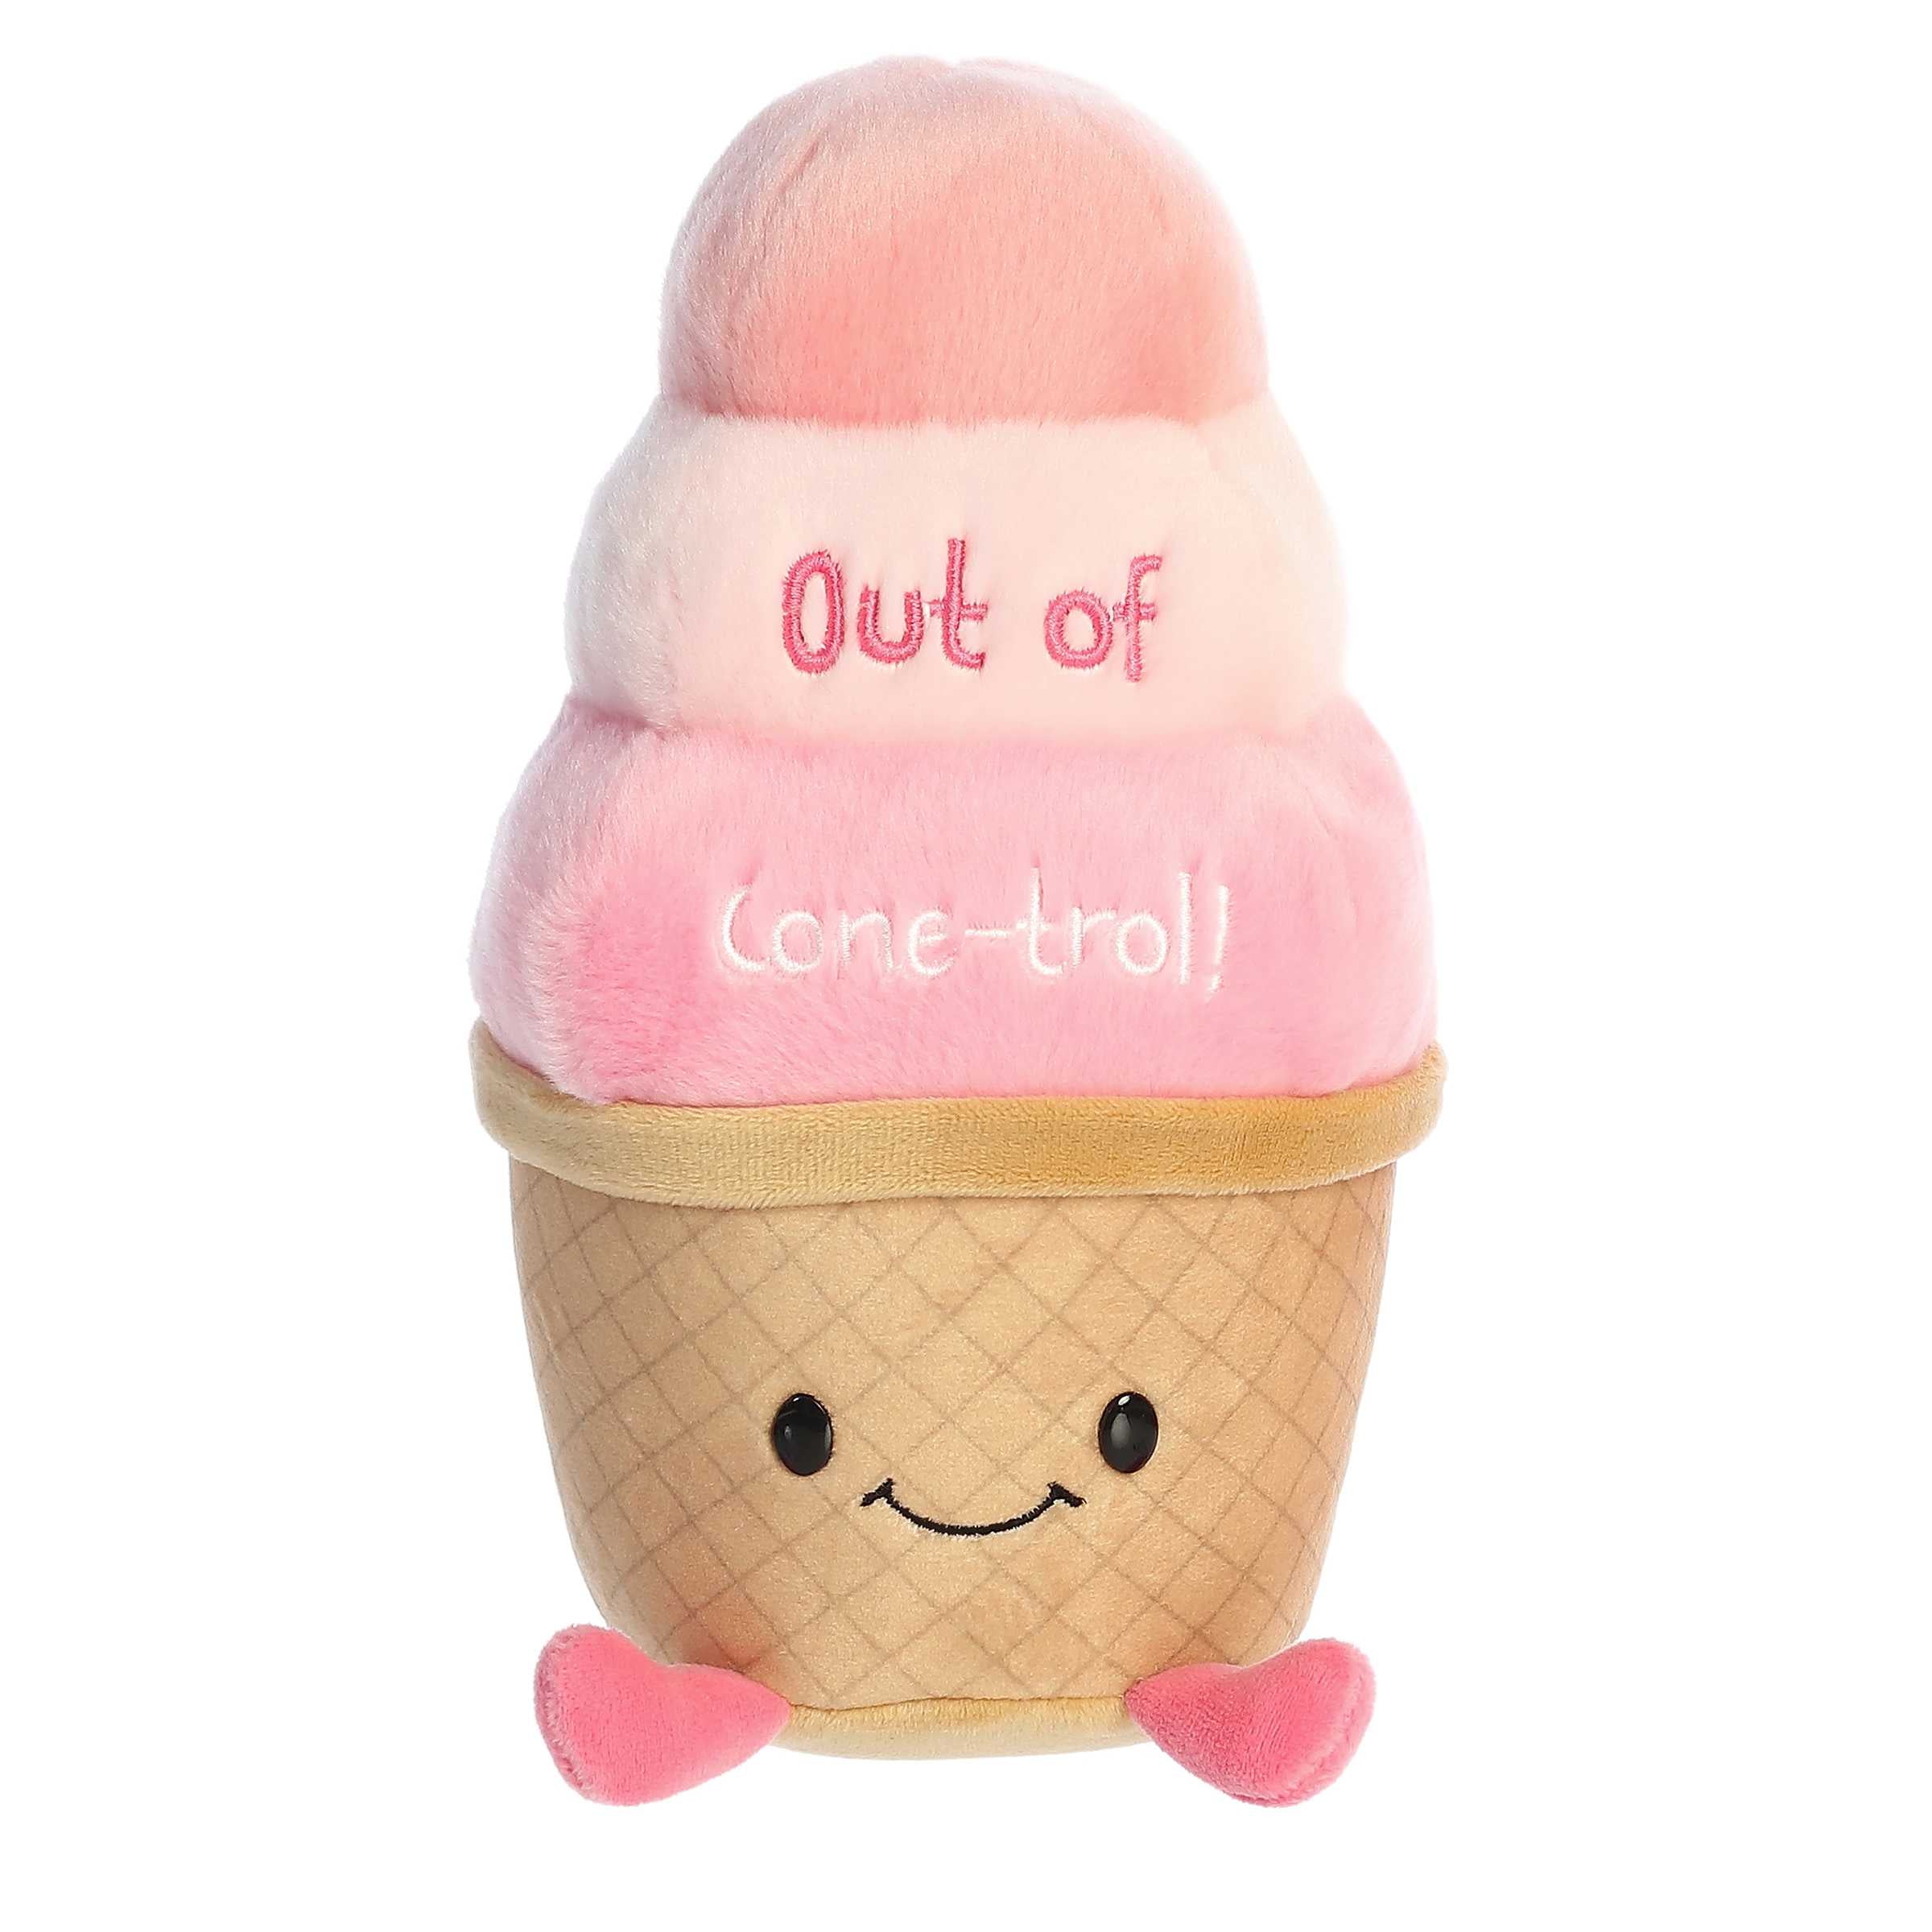 Amusing ice cream cone plush toy with pink and brown body, "Out of Cone-trol!" pun written across and a smiling face design.